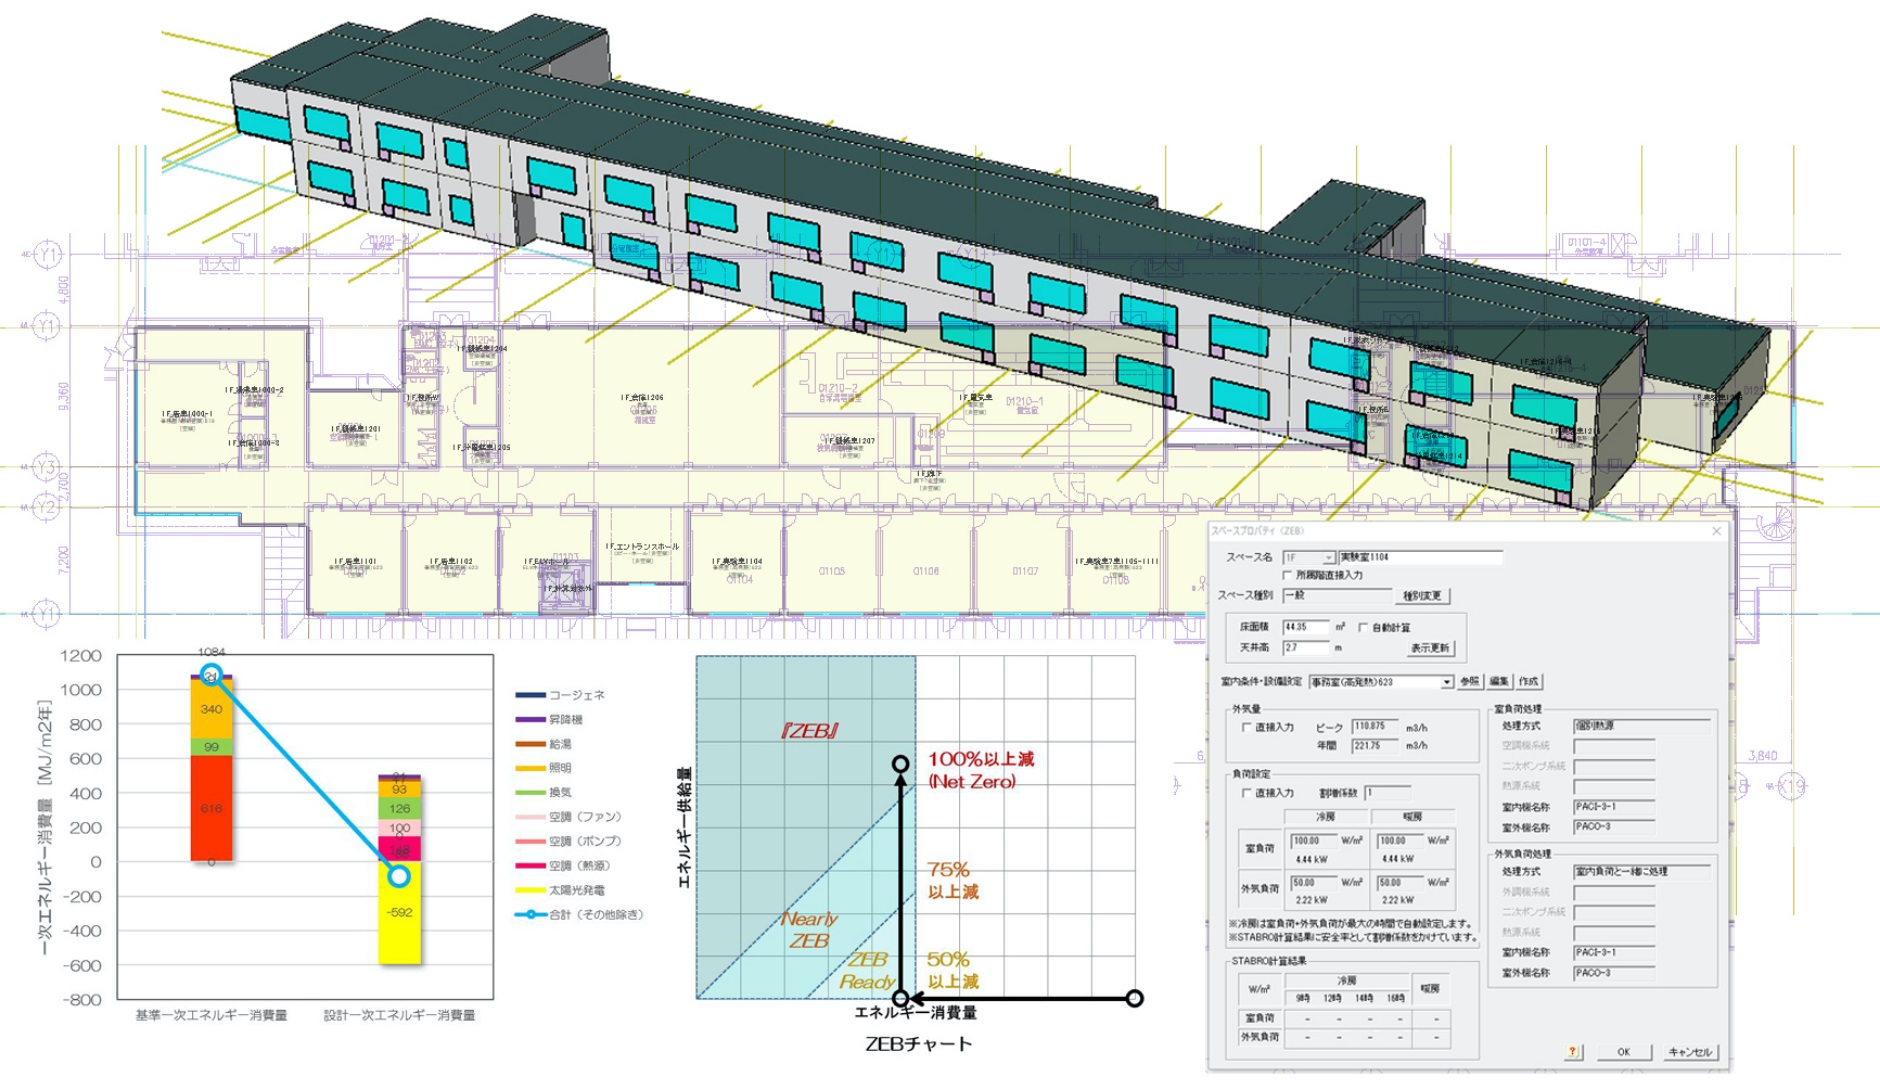 Optimization was achieved through simulation using the ZEB Visualizer, ZEB evaluation and verification tool. We performed repeated simulations of energy conservation performance for the multiple proposals being considered, to present a timely proposal on the optimal ZEB solution for the building, and reach a consensus with the building operator.